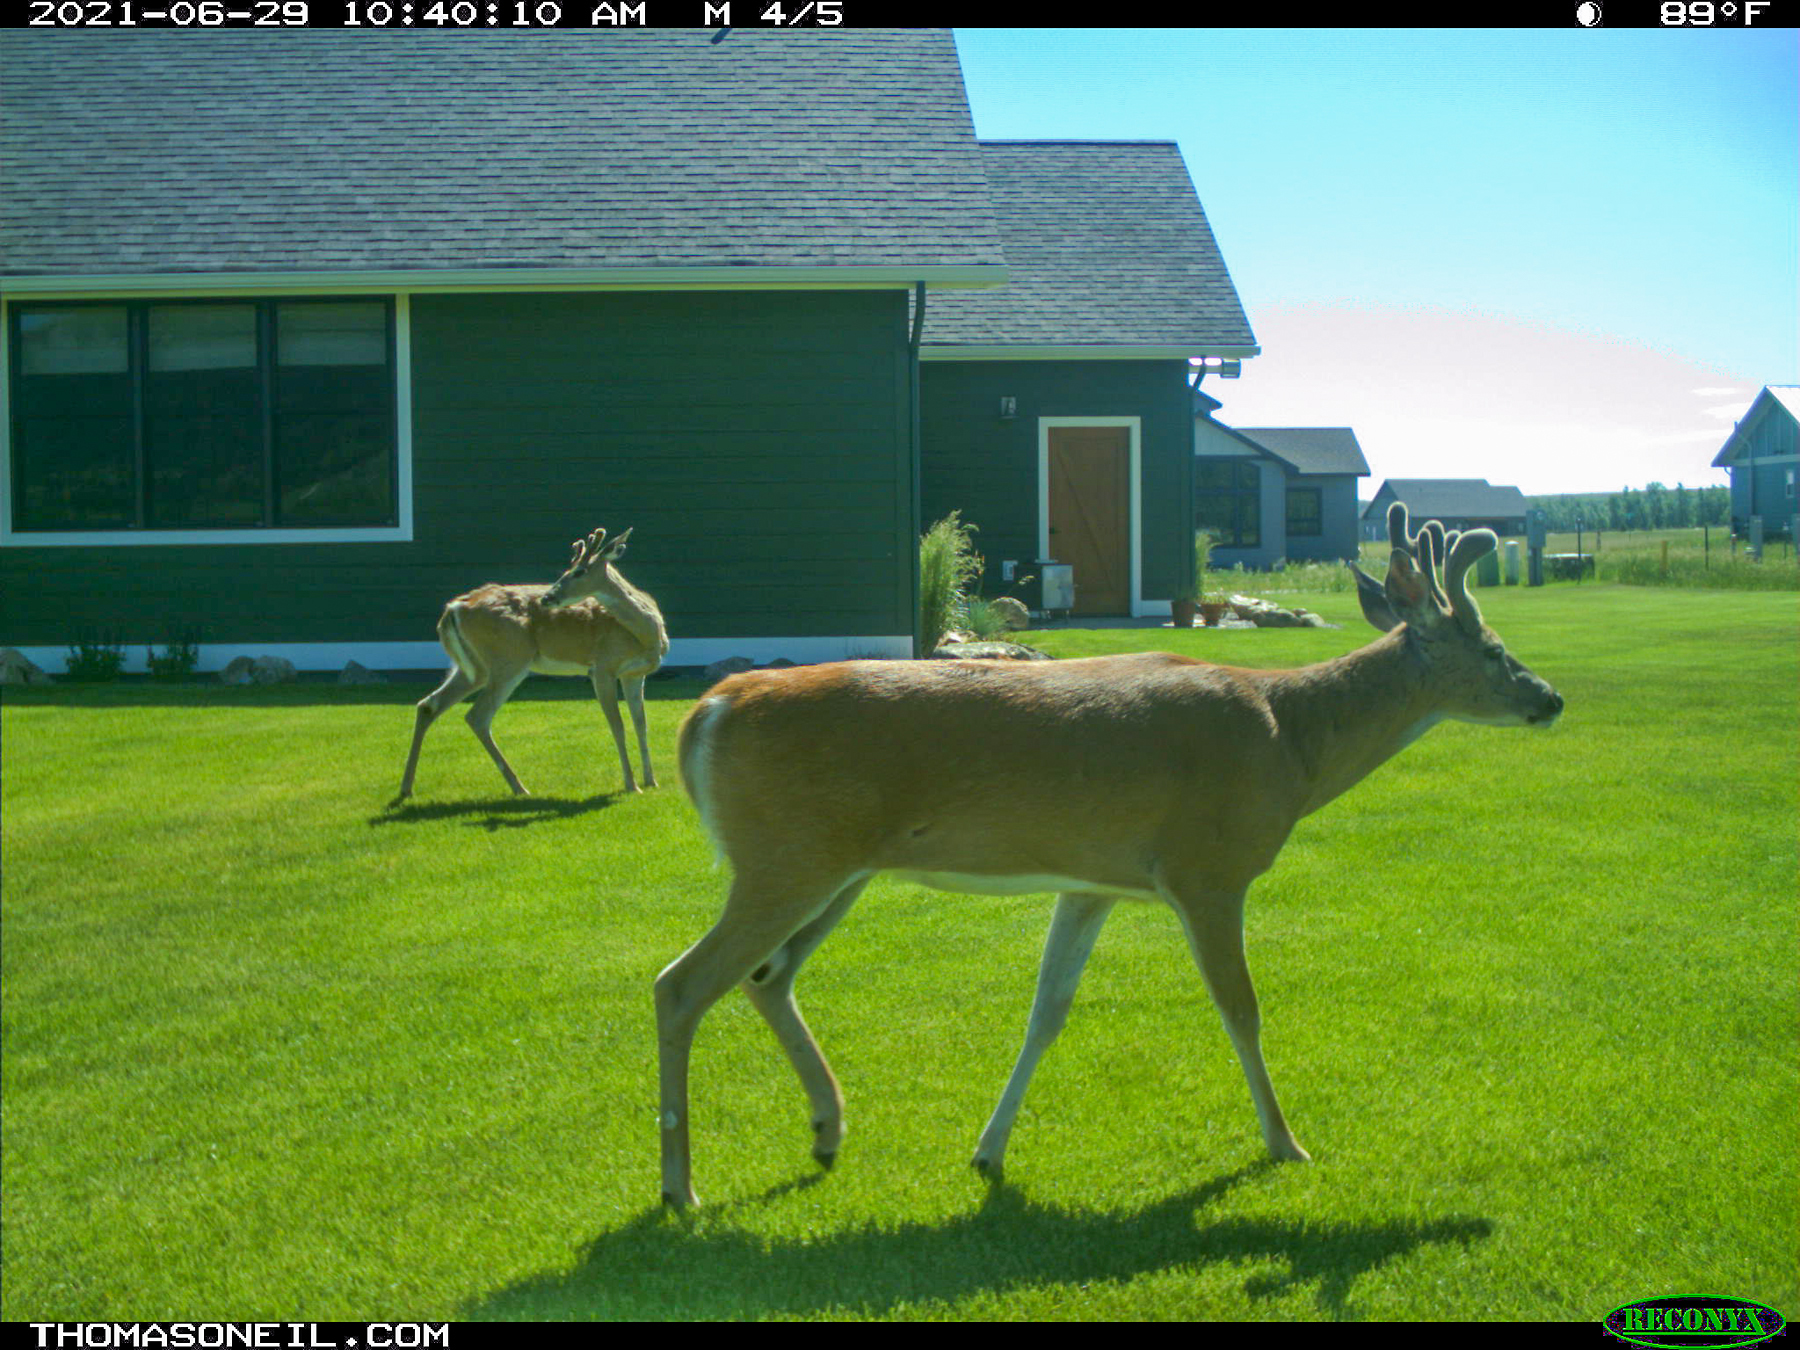 Deer on trailcam, Red Lodge, MT.  Click for next photo.